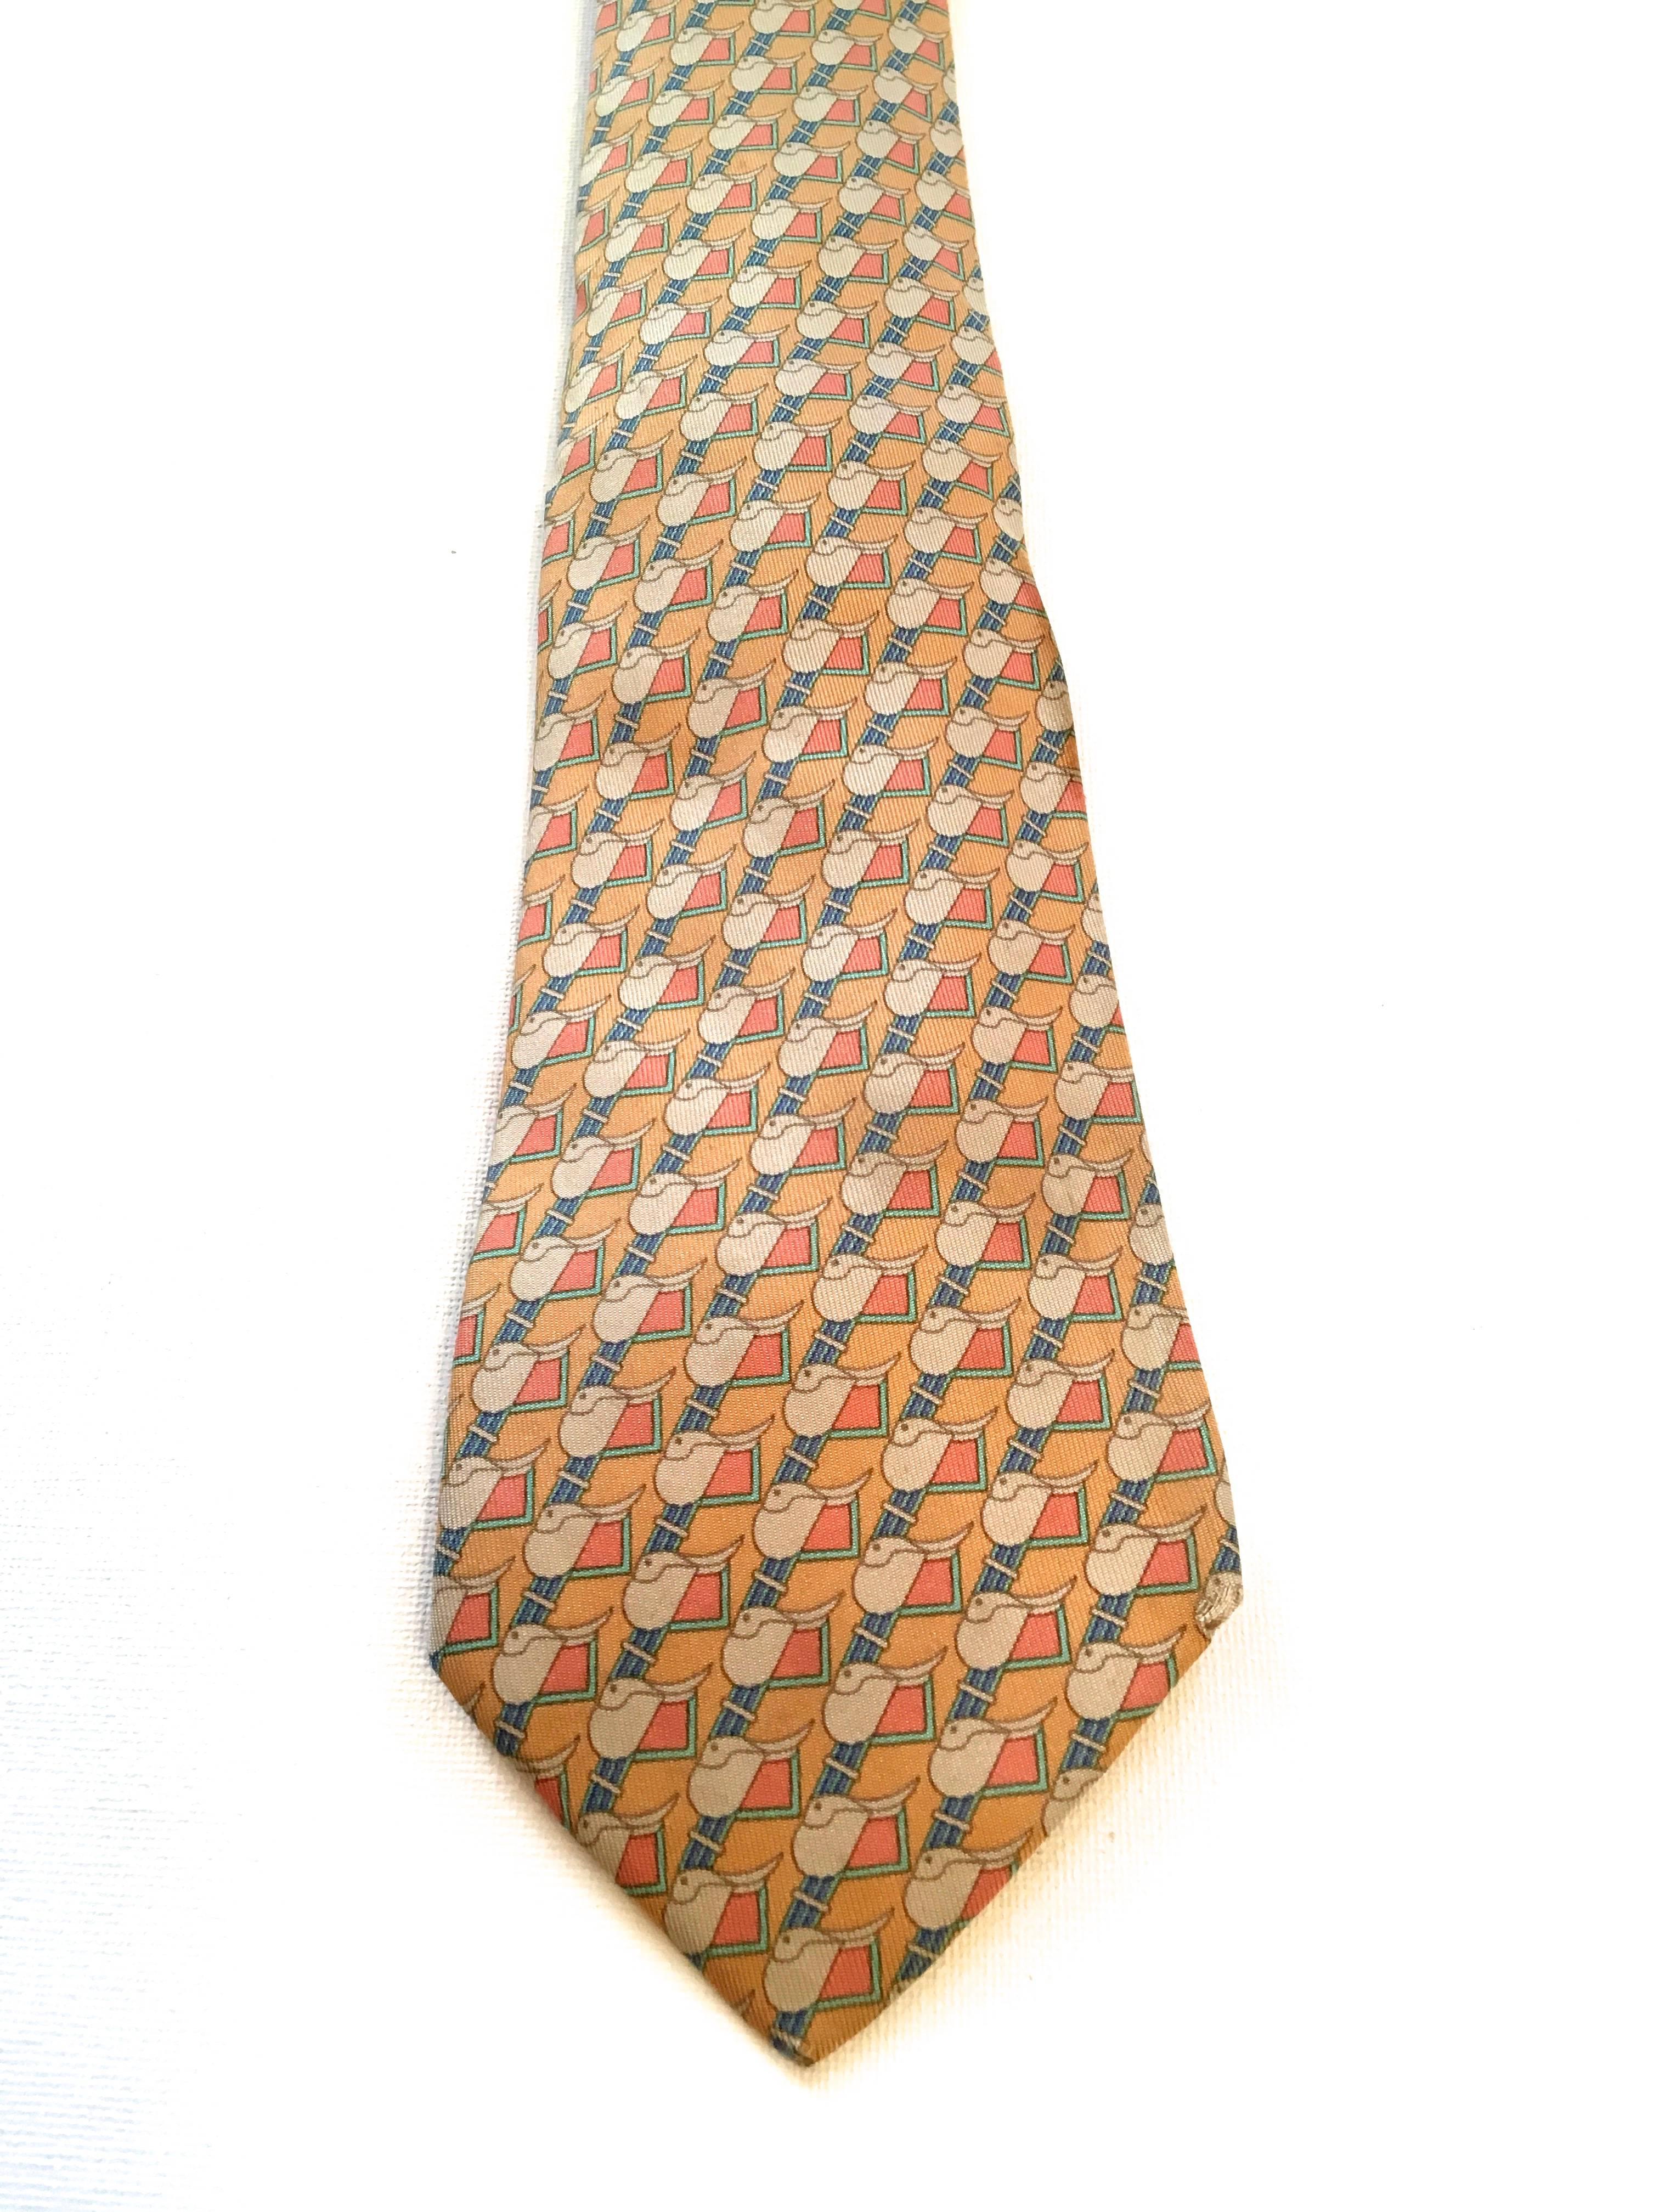 Presented here is a beautiful necktie from Hermes Paris. This beautiful neck tie is a geometric pattern consisting of abstract shapes in a tessellation design. The color is comprised of shades of white, yellow, pink and blue. The tie measures 57